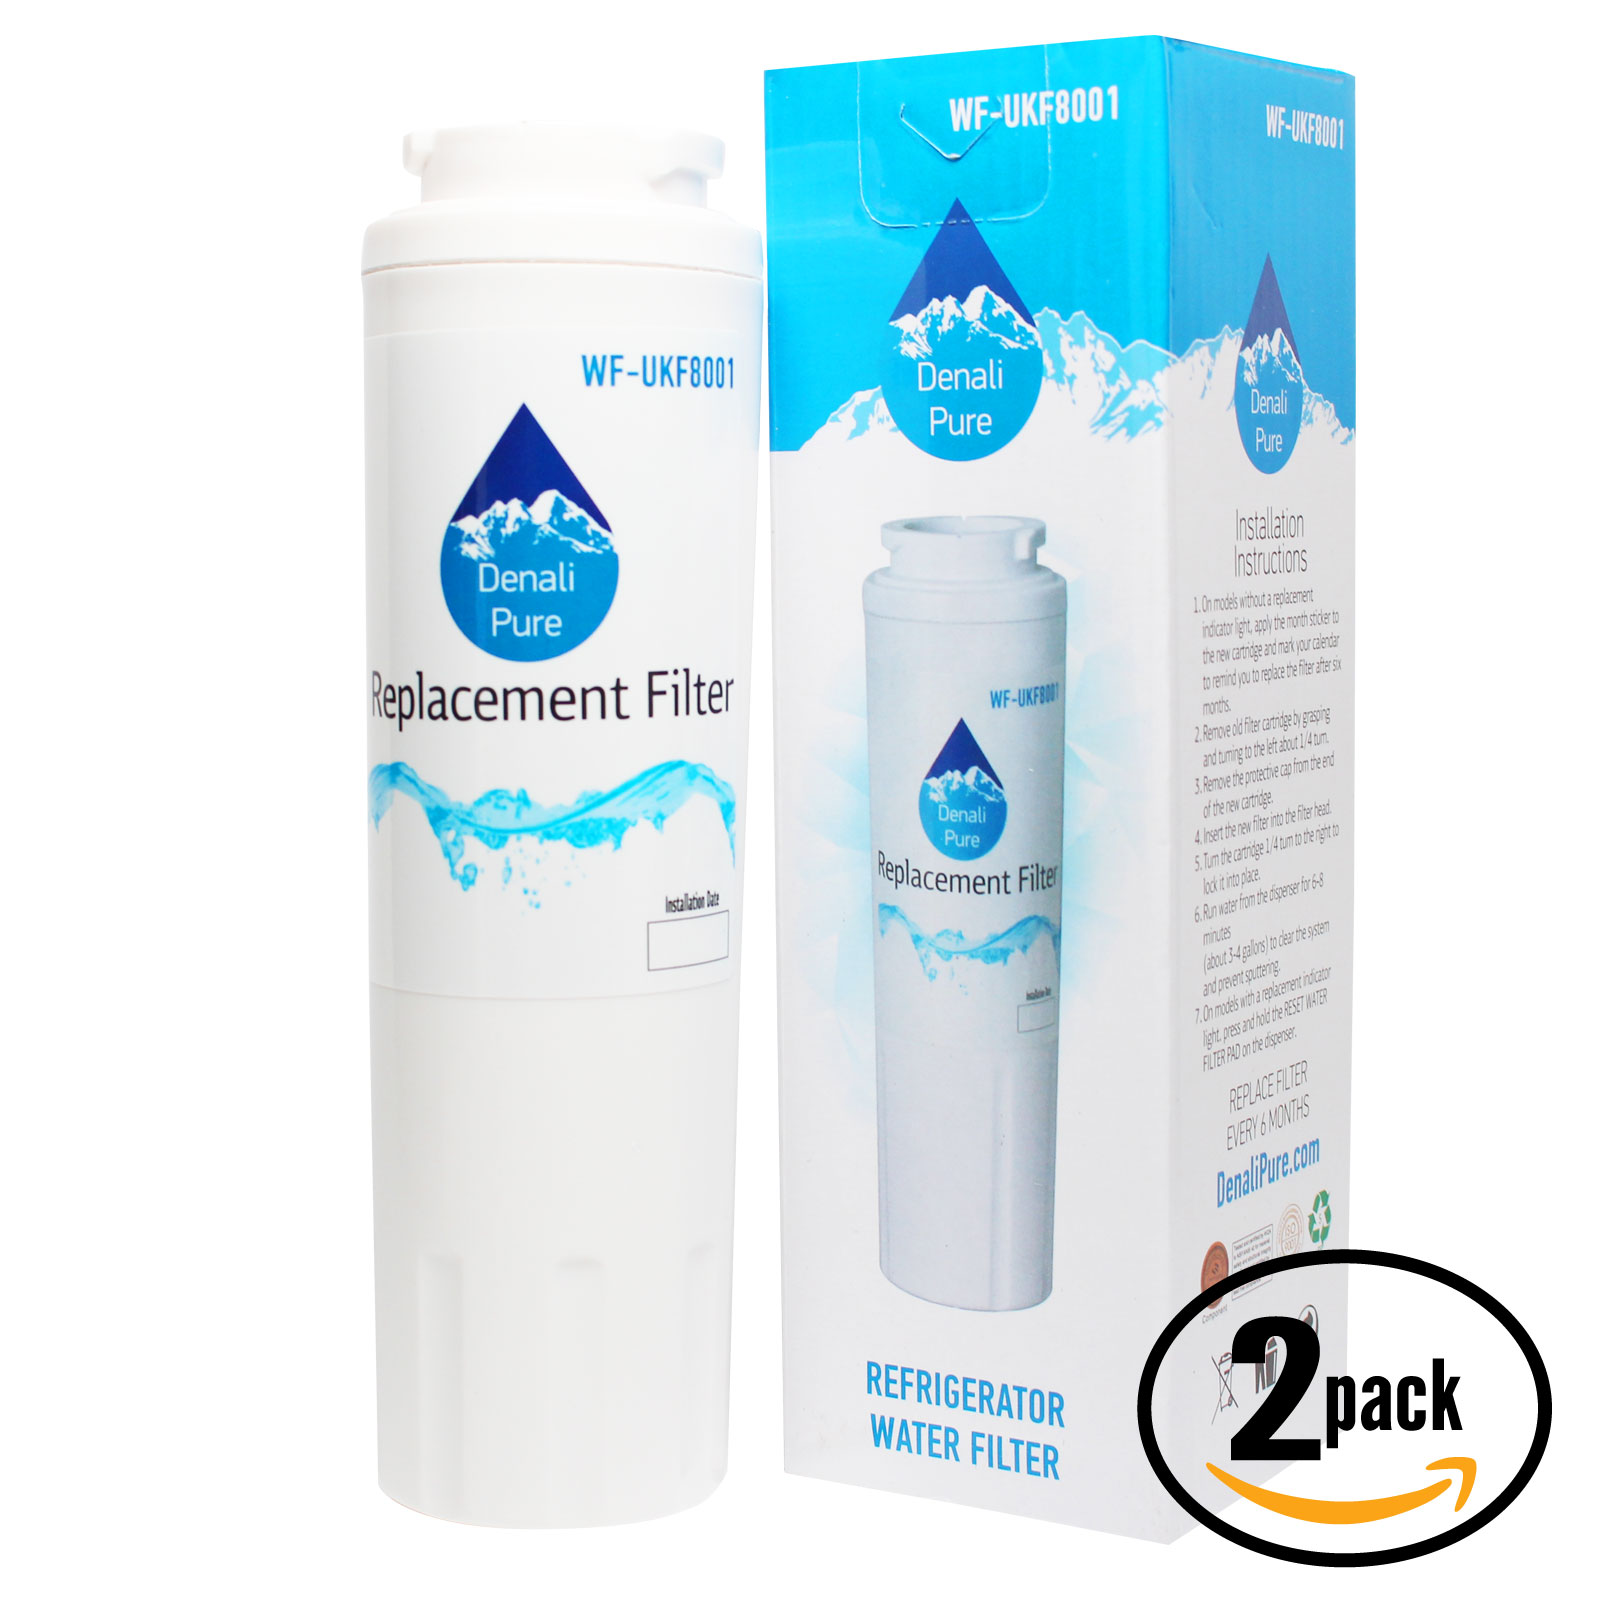 2-Pack Replacement for Whirlpool GI5FVAXVQ01 Refrigerator Water Filter - Compatible with Whirlpool 4396395 Fridge Water Filter Cartridge - image 1 of 4